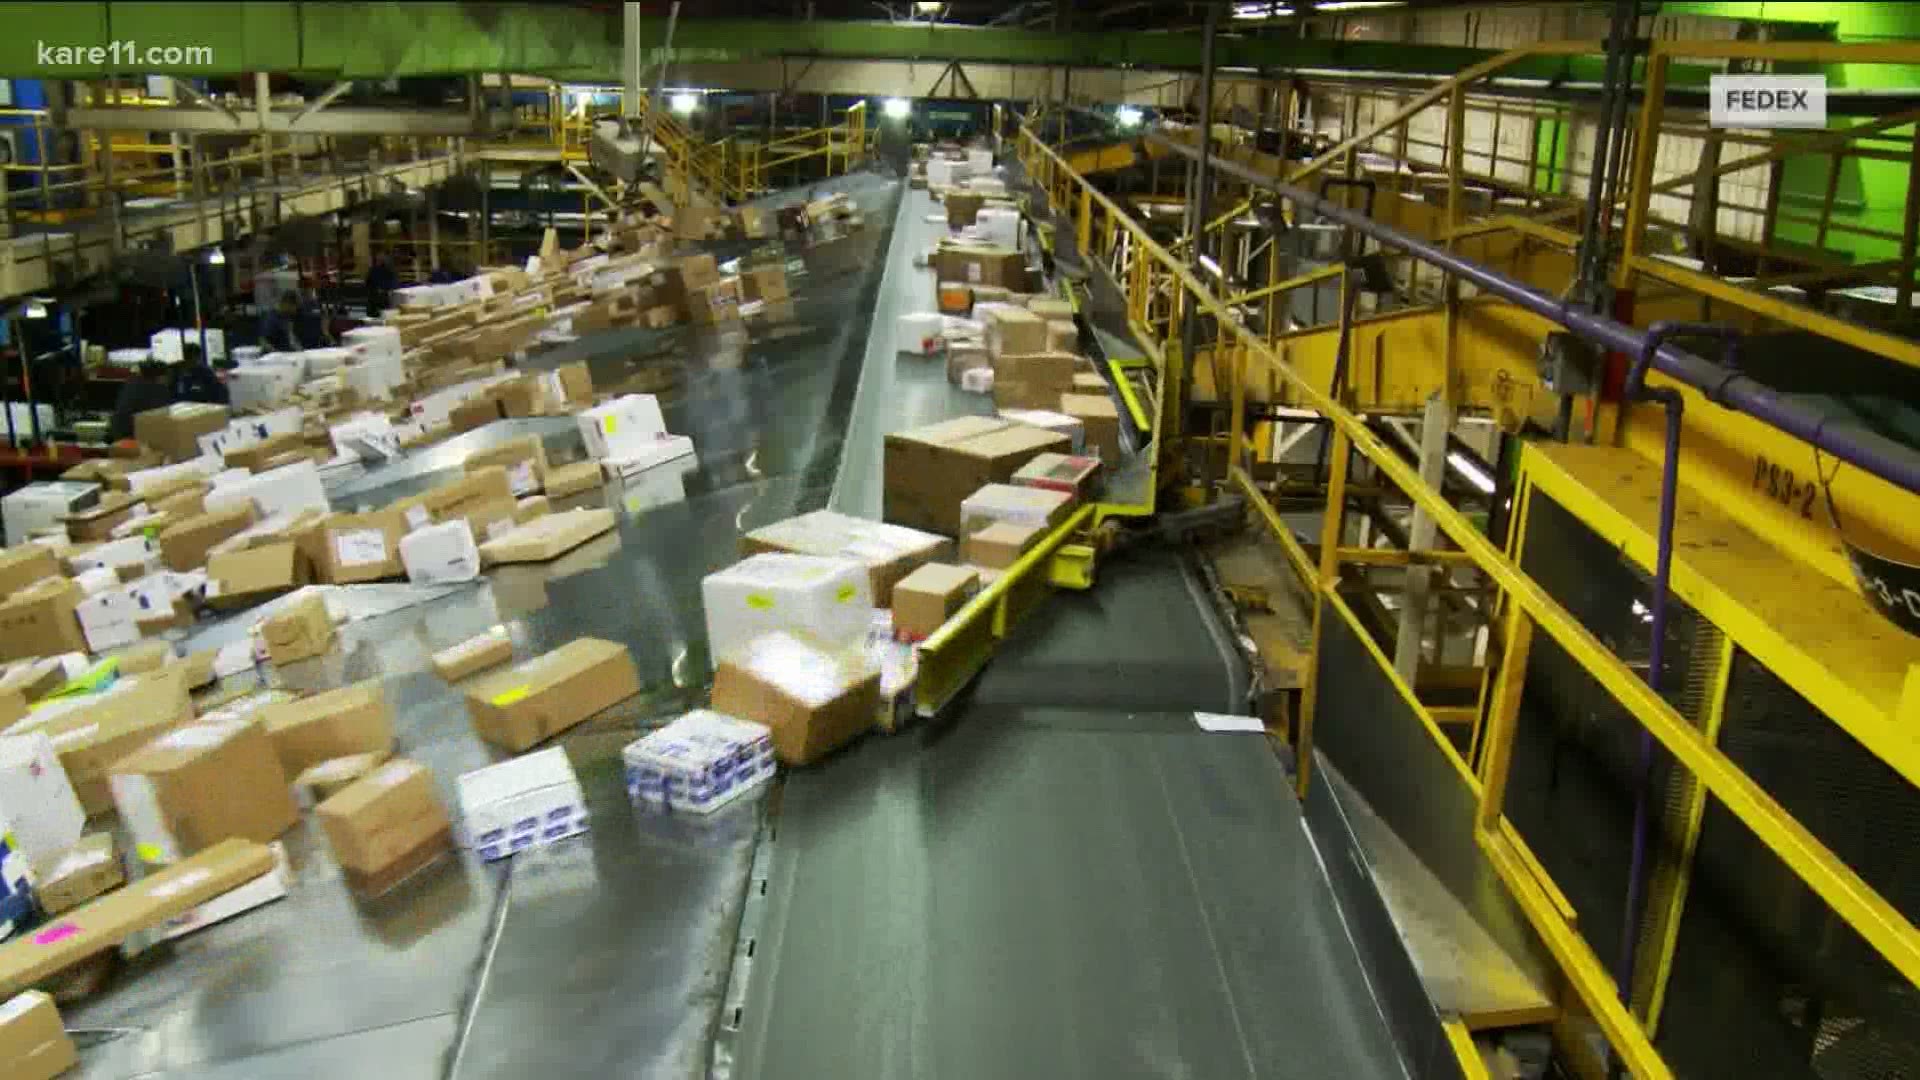 Retail experts are expecting to see an unprecedented number of shipped packages this holiday season. Here’s what you need to know to make sure your packages arrive